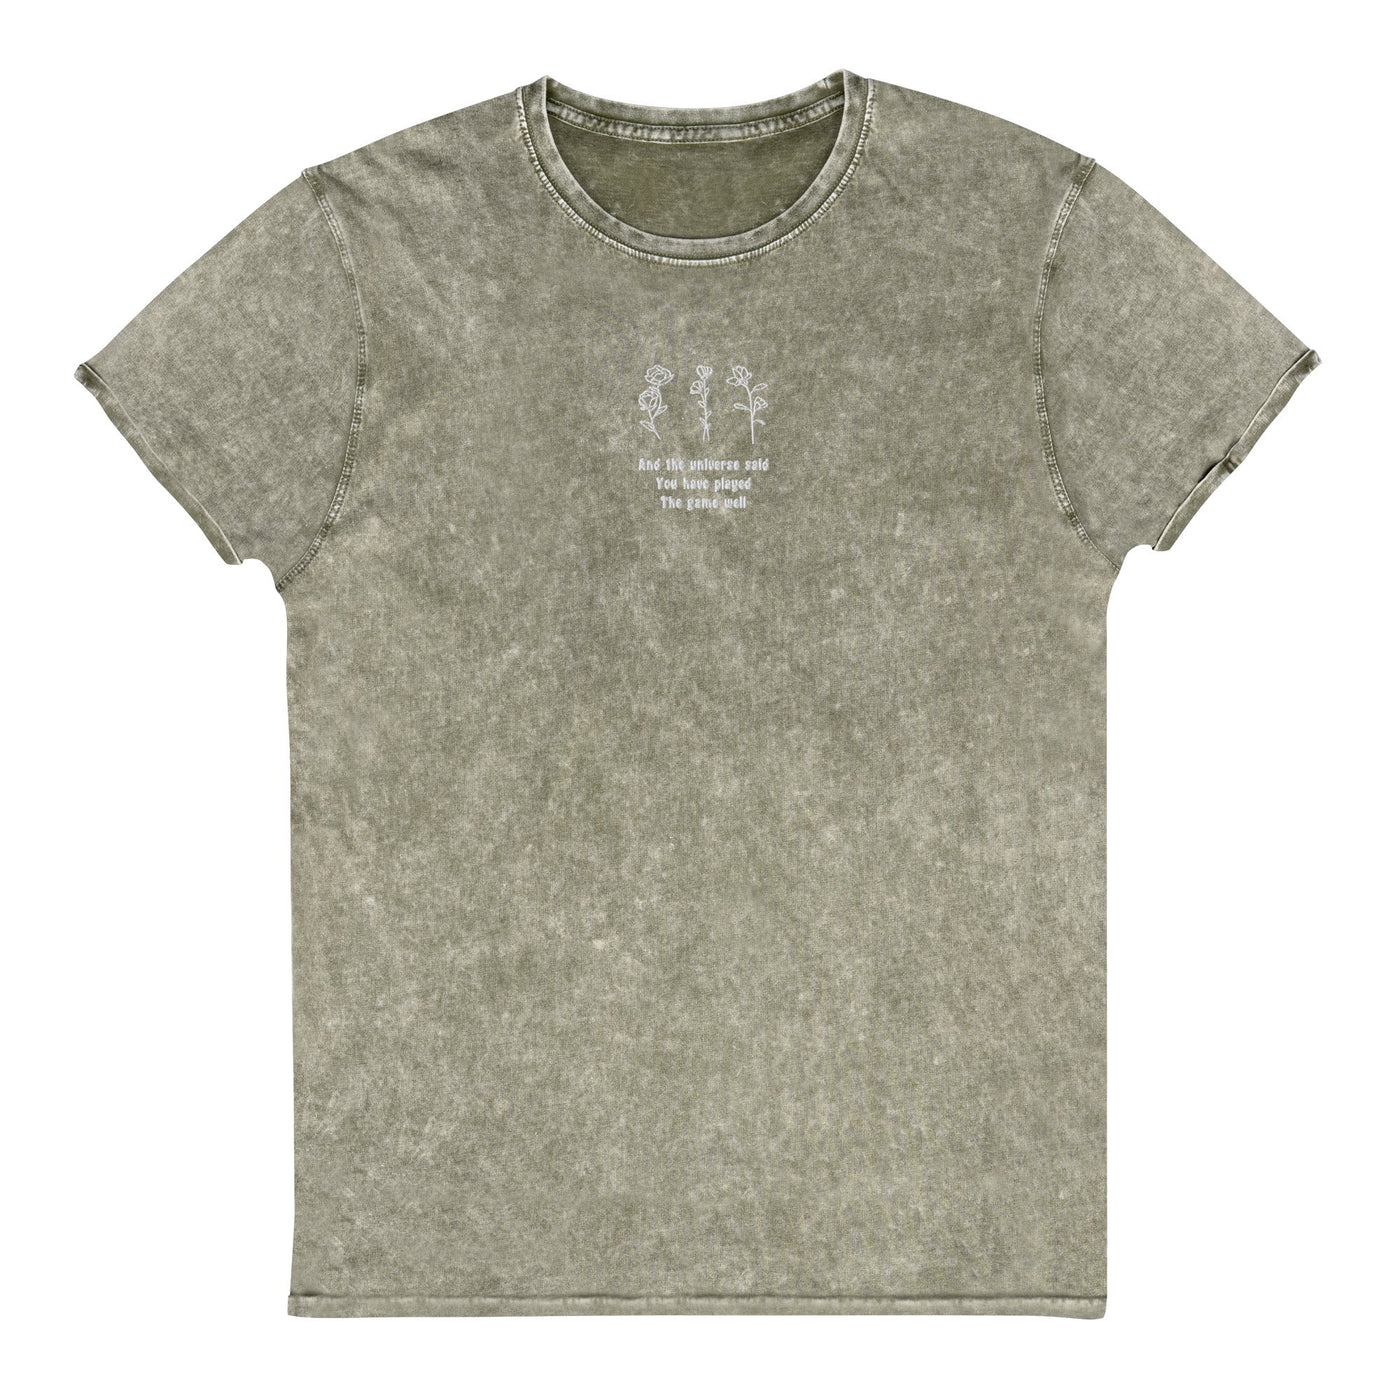 You Have Played the Game Well | Denim T-Shirt | Minecraft Threads and Thistles Inventory Dark Army Green S 